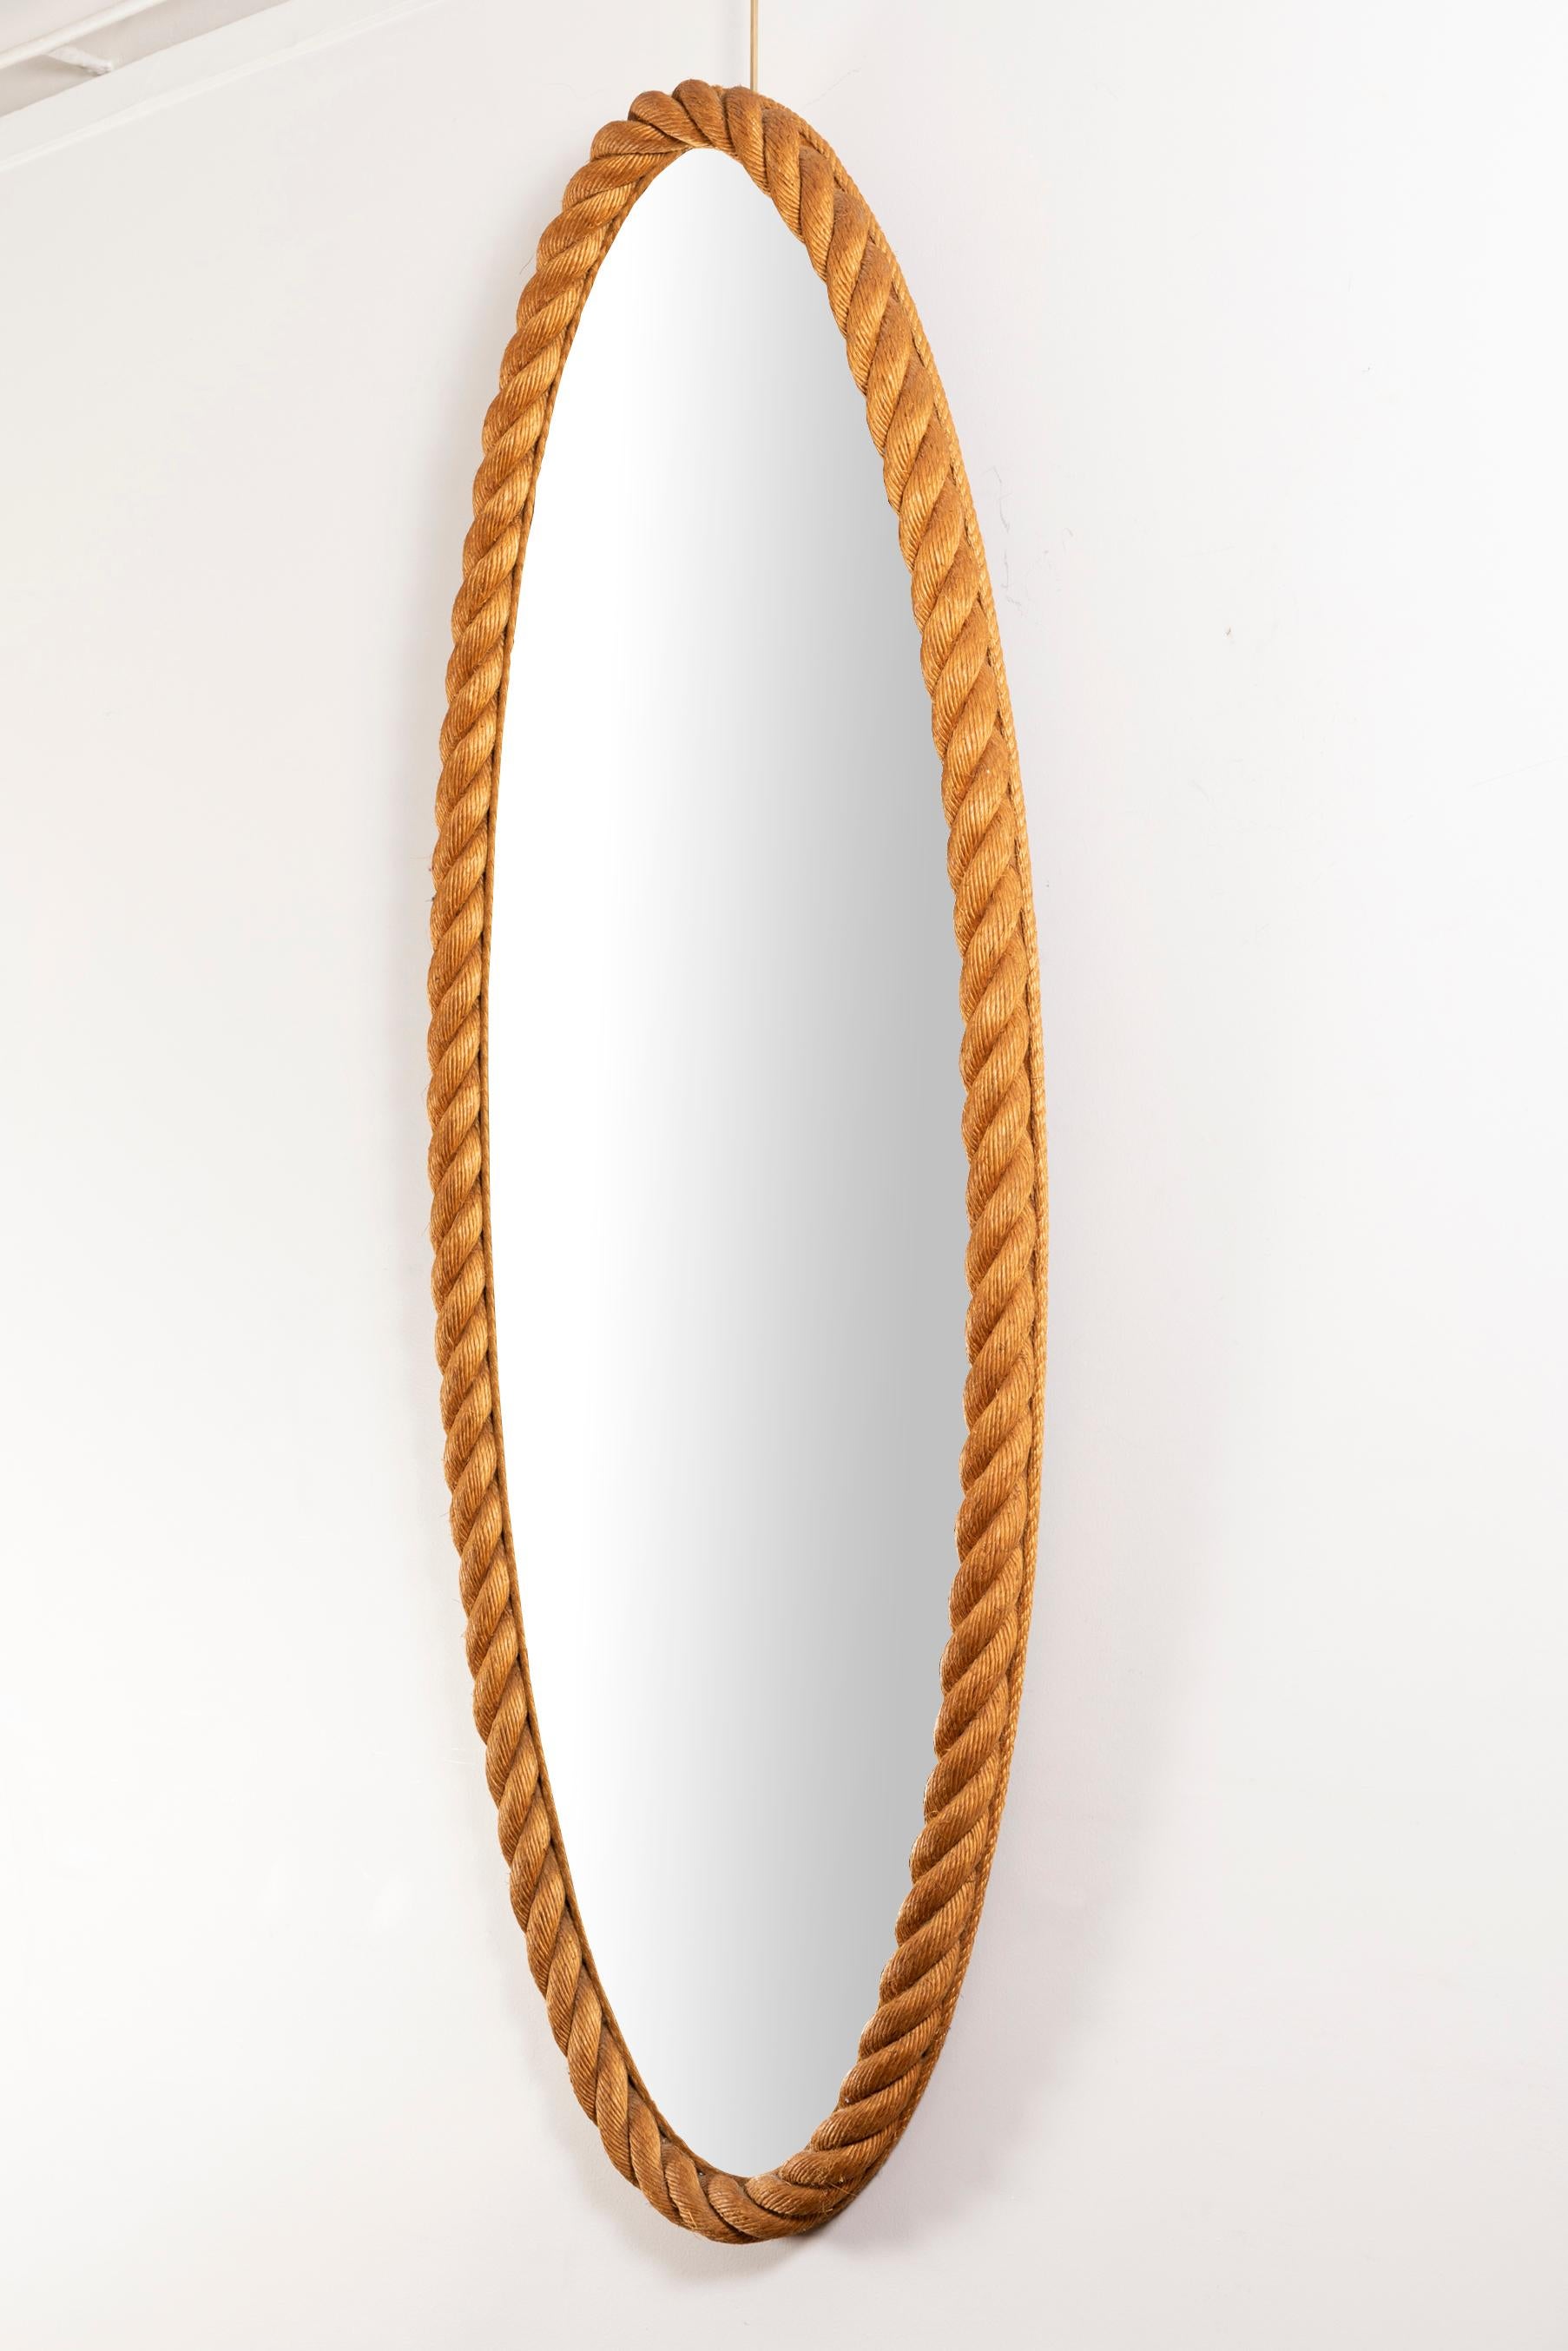 Oval rope mirror
Design by Adrien Audoux and Frida Minet
Simple frame
Made in Golfe-Juan,
France, circa 1950s.

Measures: H 150 cm / 59.05 in.
W 59 cm / 23.22 in.
D 5 cm / 1.96 in.
 